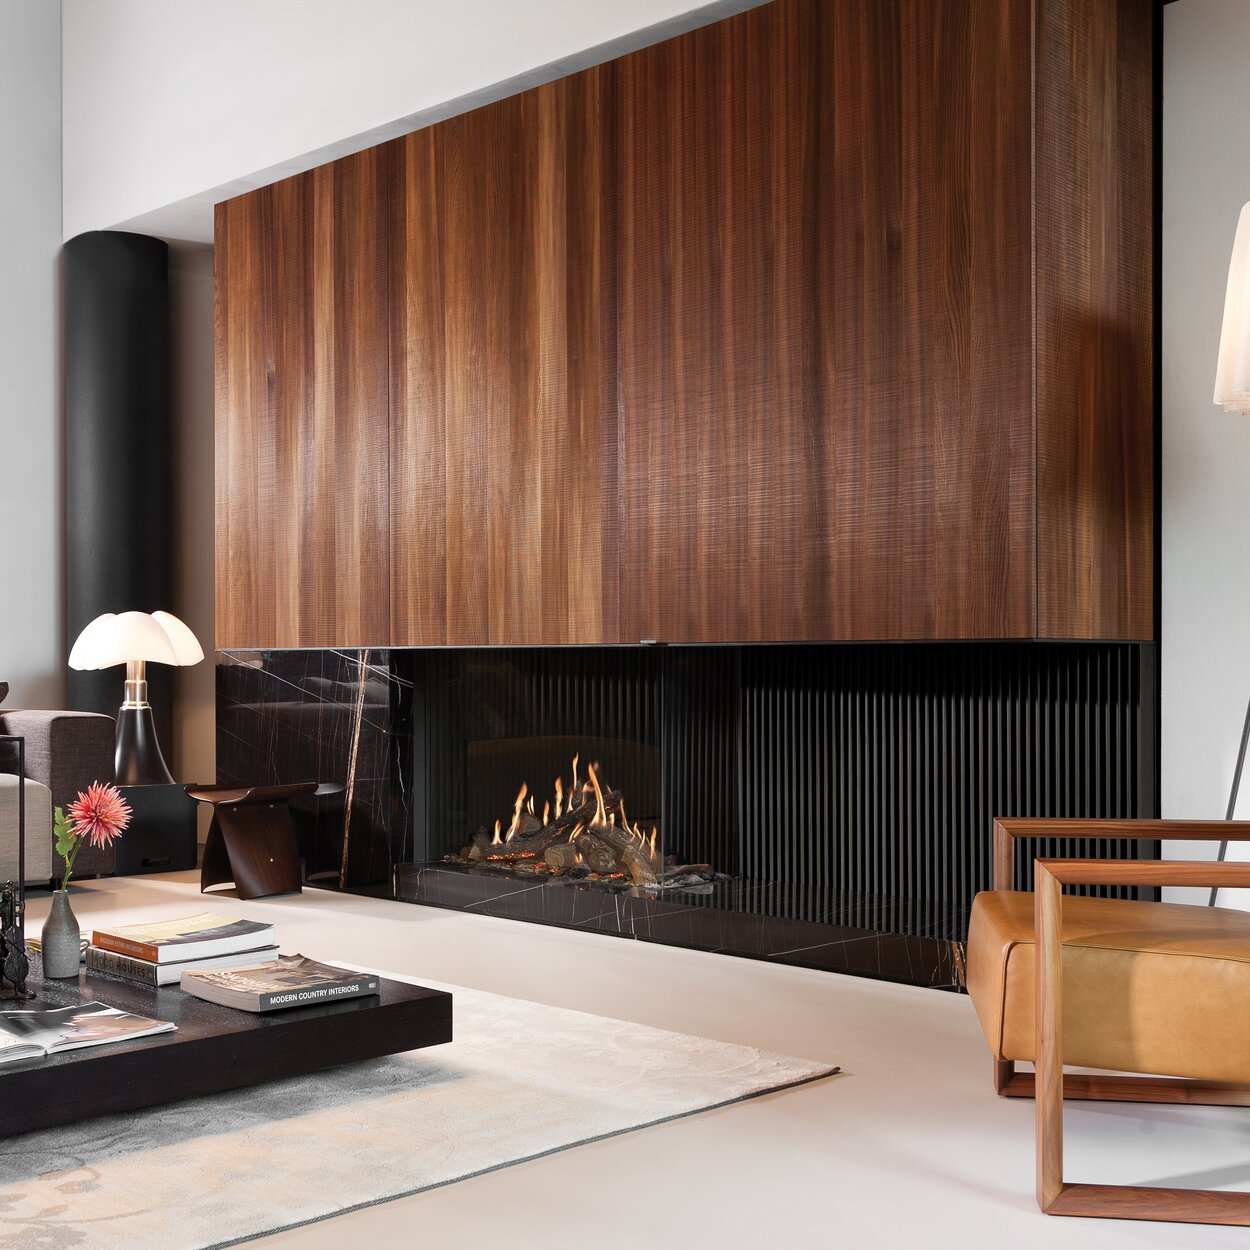 Gas fireplace GP110/55C 2-sided glazed with dark rear wall and wood panelling in modern living room with leather armchair